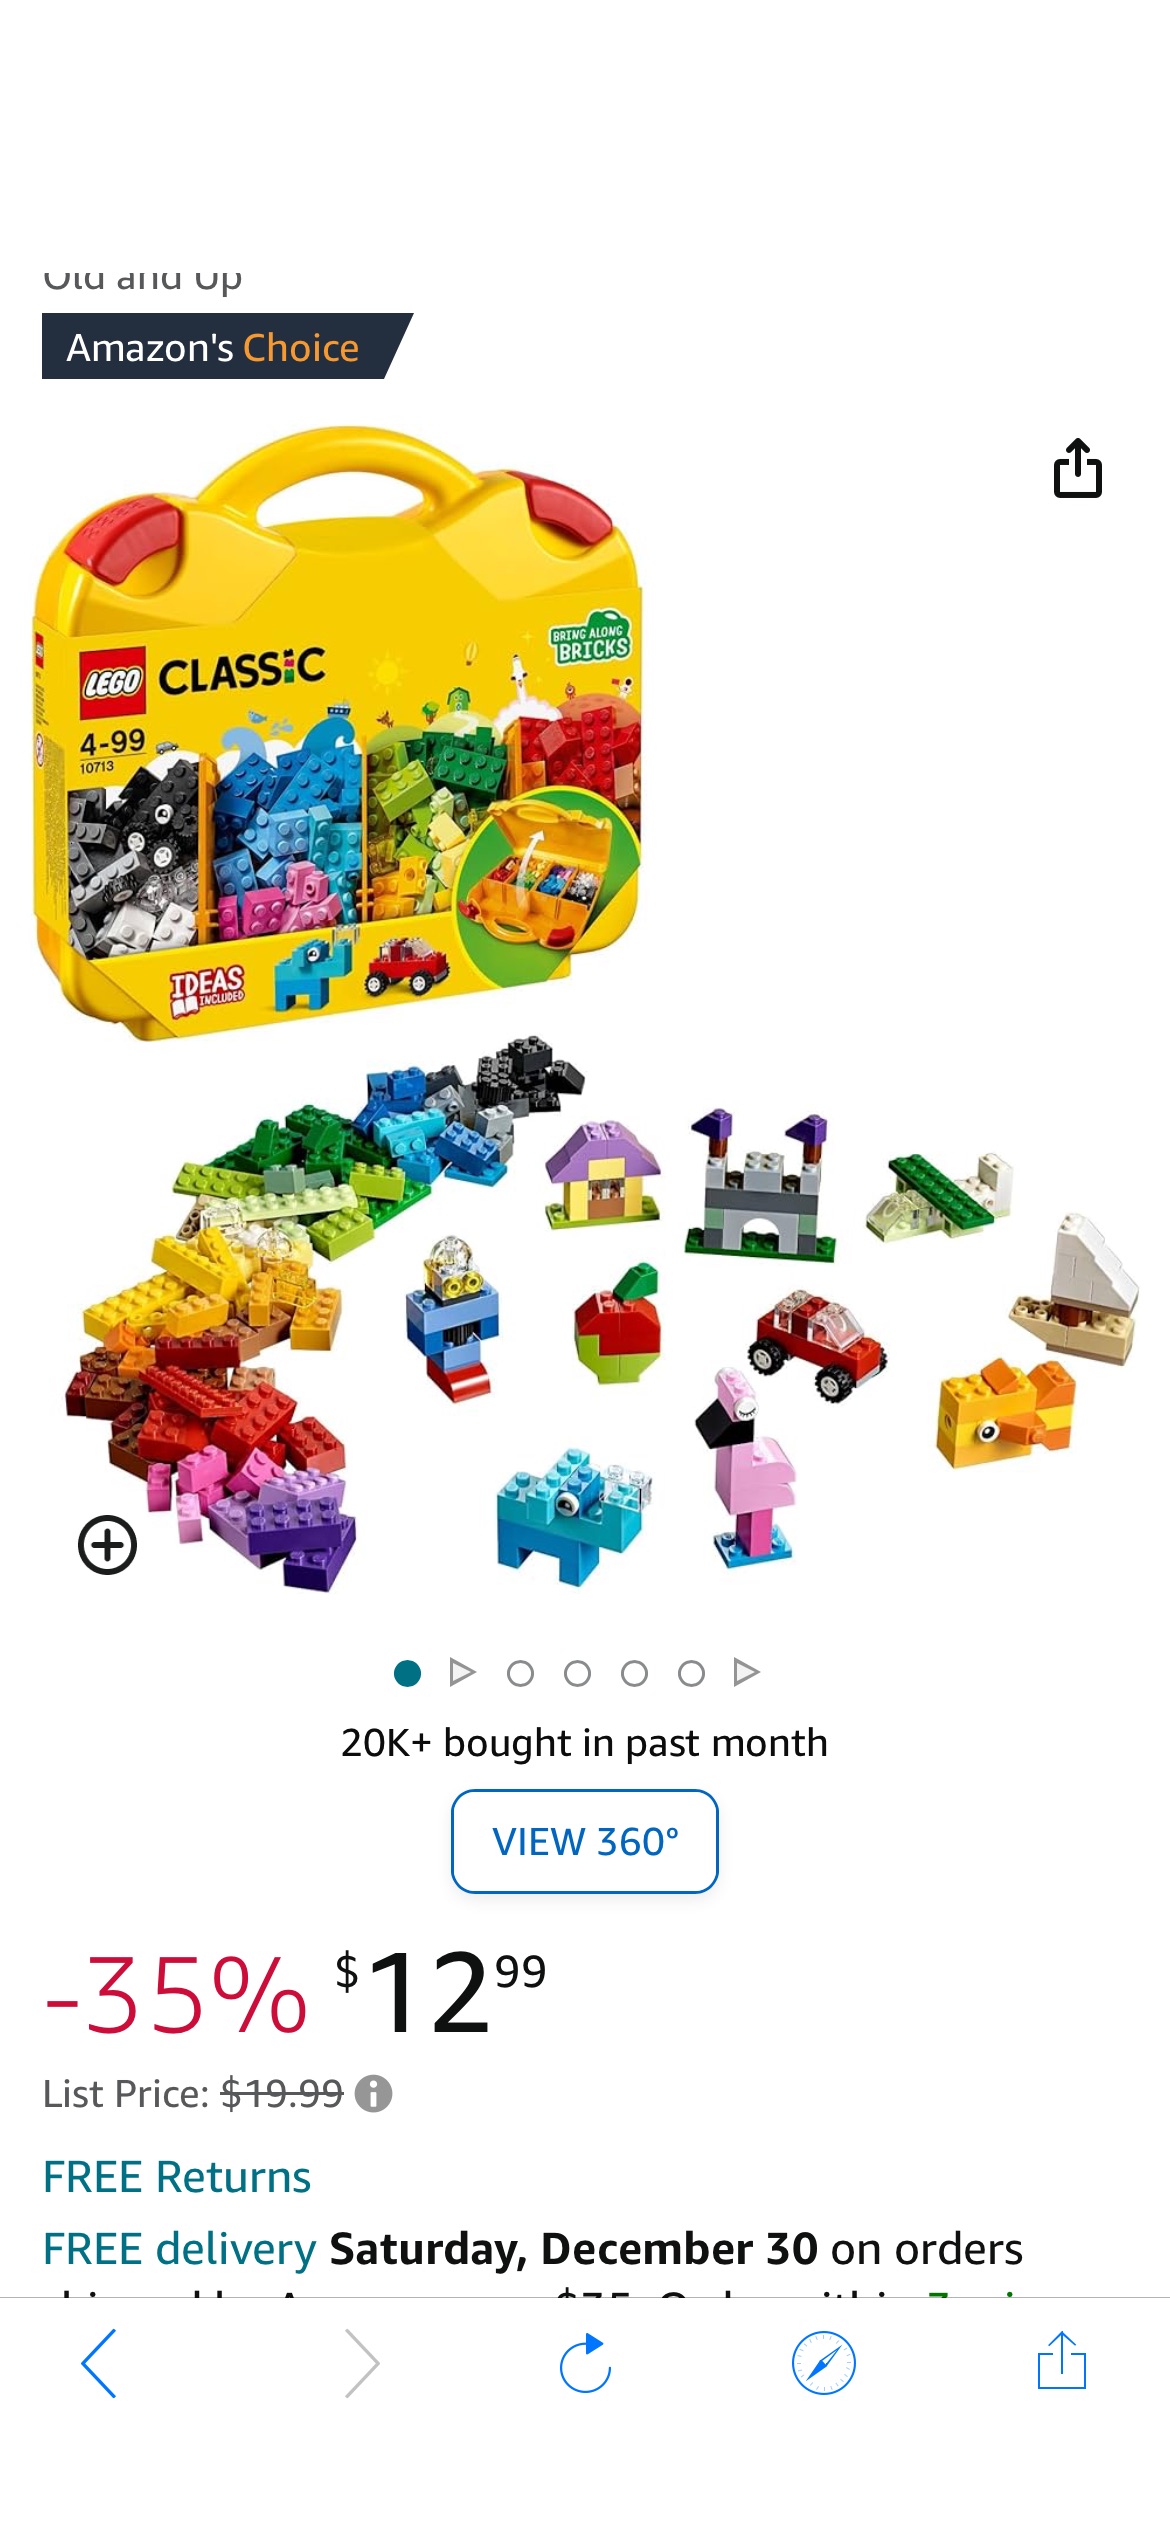 Amazon.com: LEGO Classic Creative Suitcase 10713 - Includes Sorting Storage Organizer Case with Fun Colorful Building Bricks, Preschool Learning Toy for Kids, Boys and Girls Ages 4 Years Old and Up : 